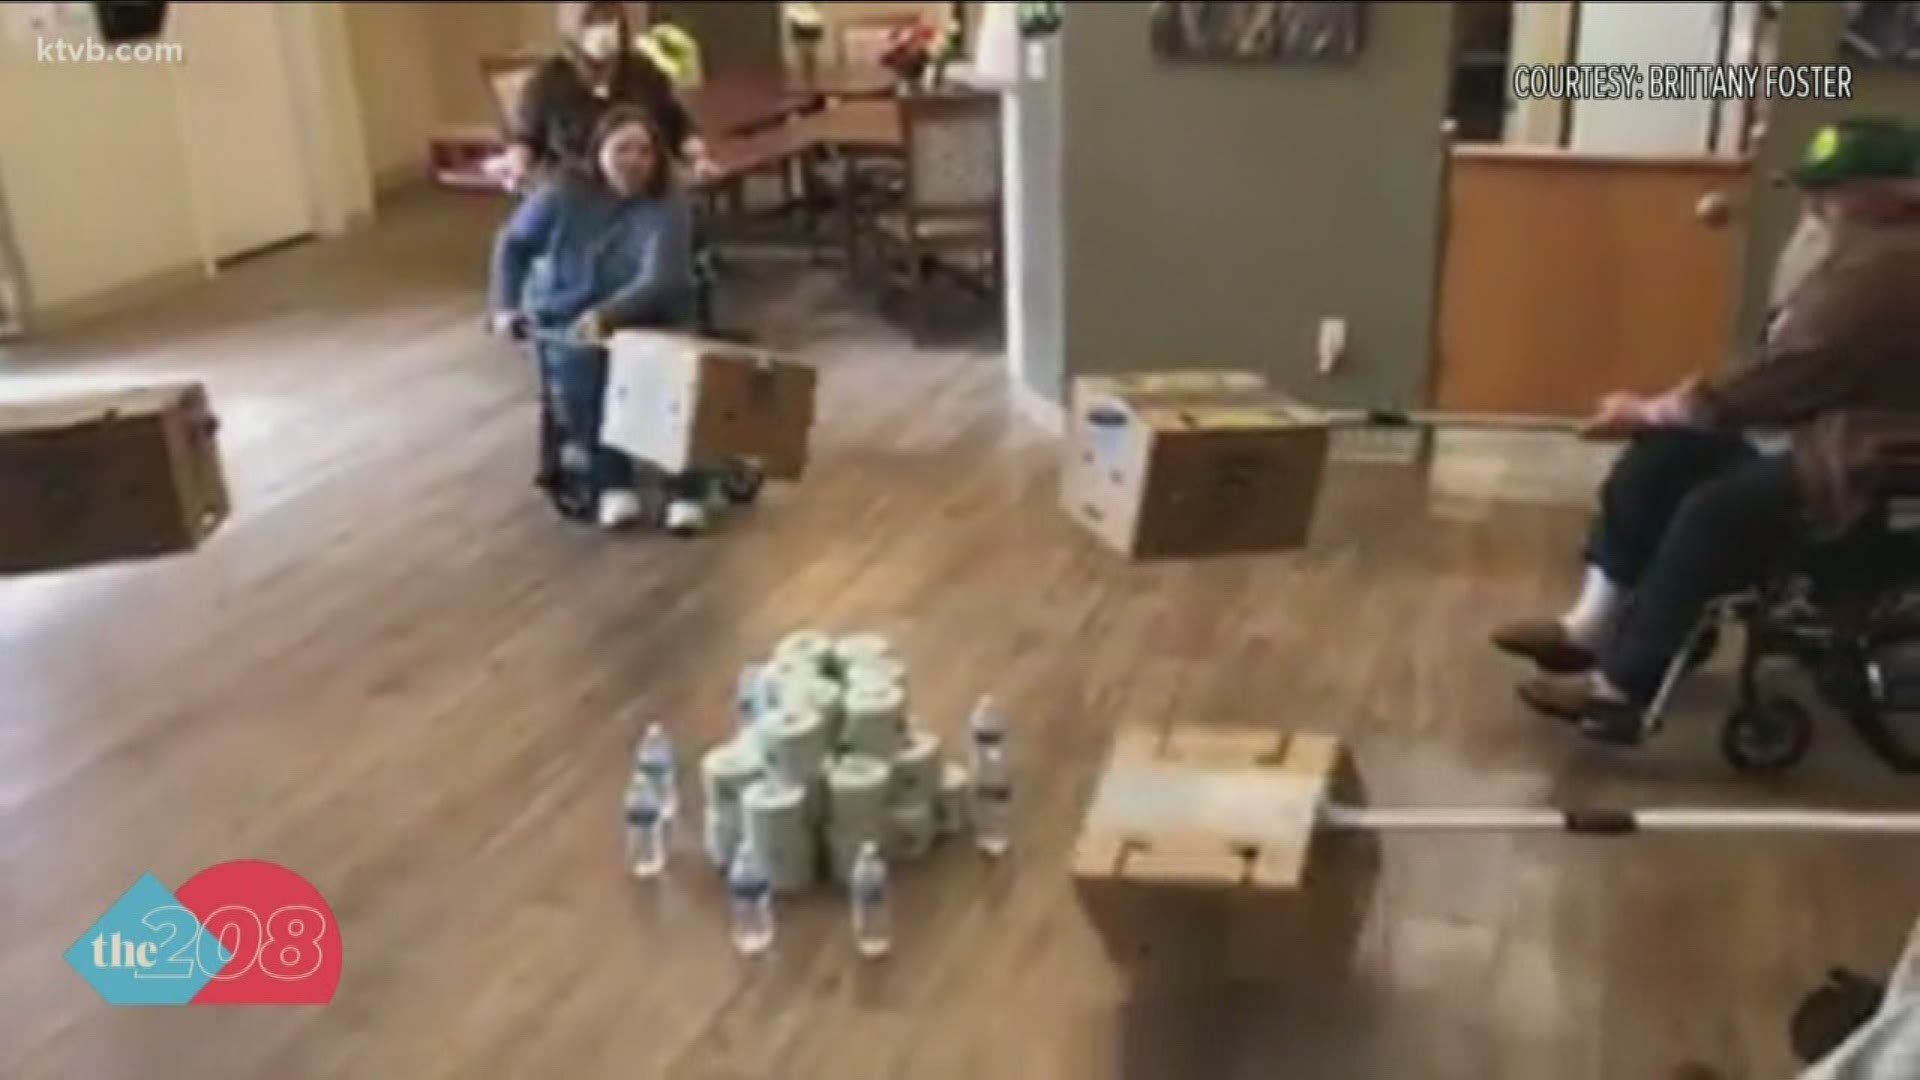 A group of seniors at a retirement home in Boise decided to have a little fun while in quarantine.